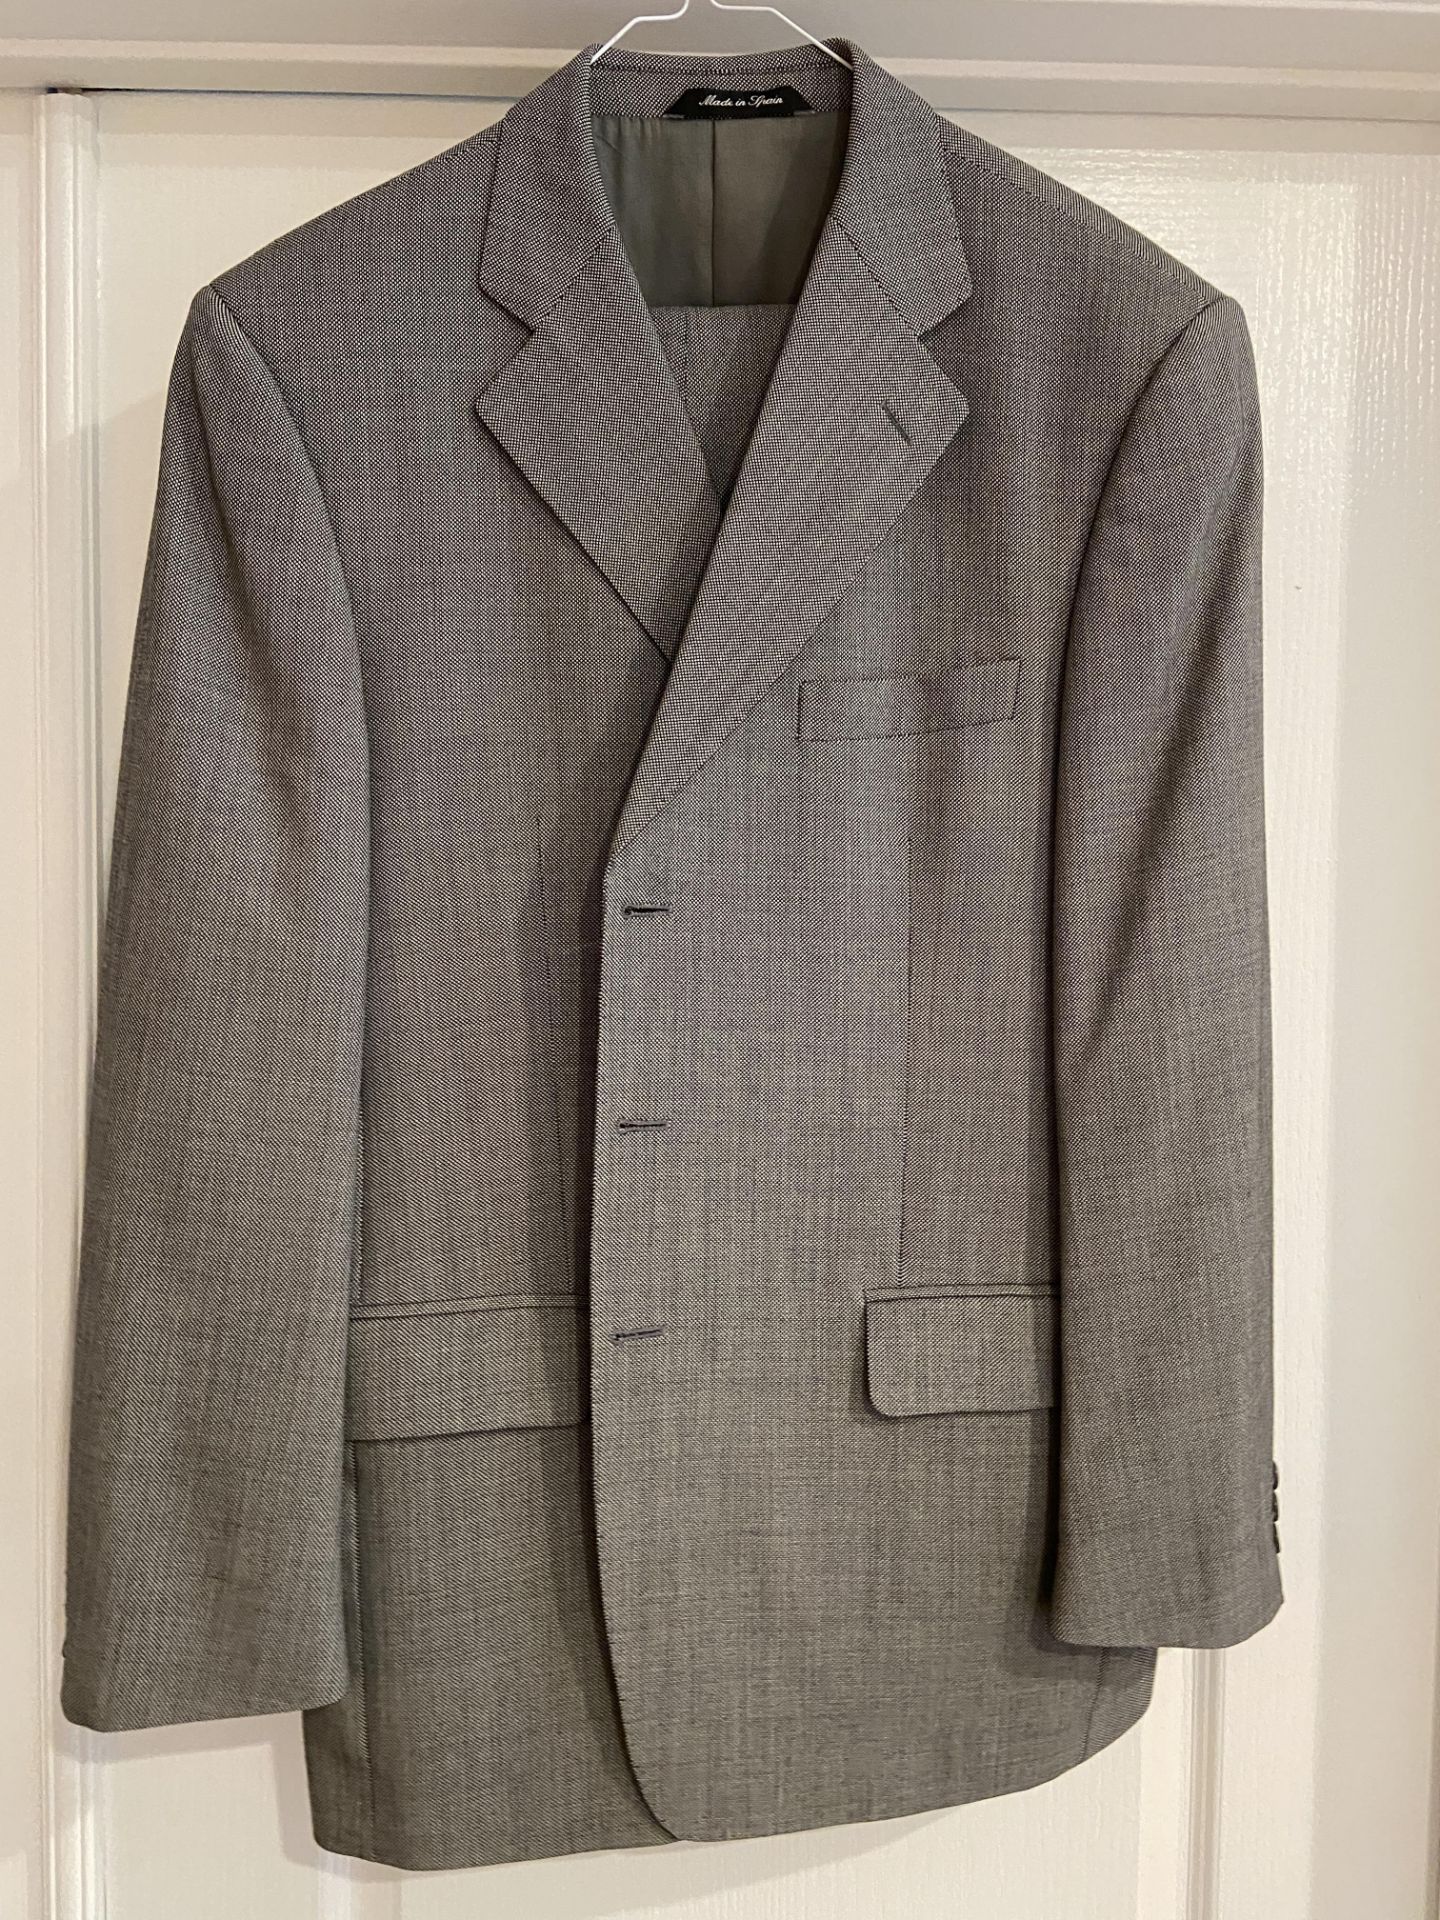 Collection of High End Men's Clothing: 6 Suits Size 42R, 1 Sport Jacket Size 42R, 1 Polo XL - Image 12 of 18